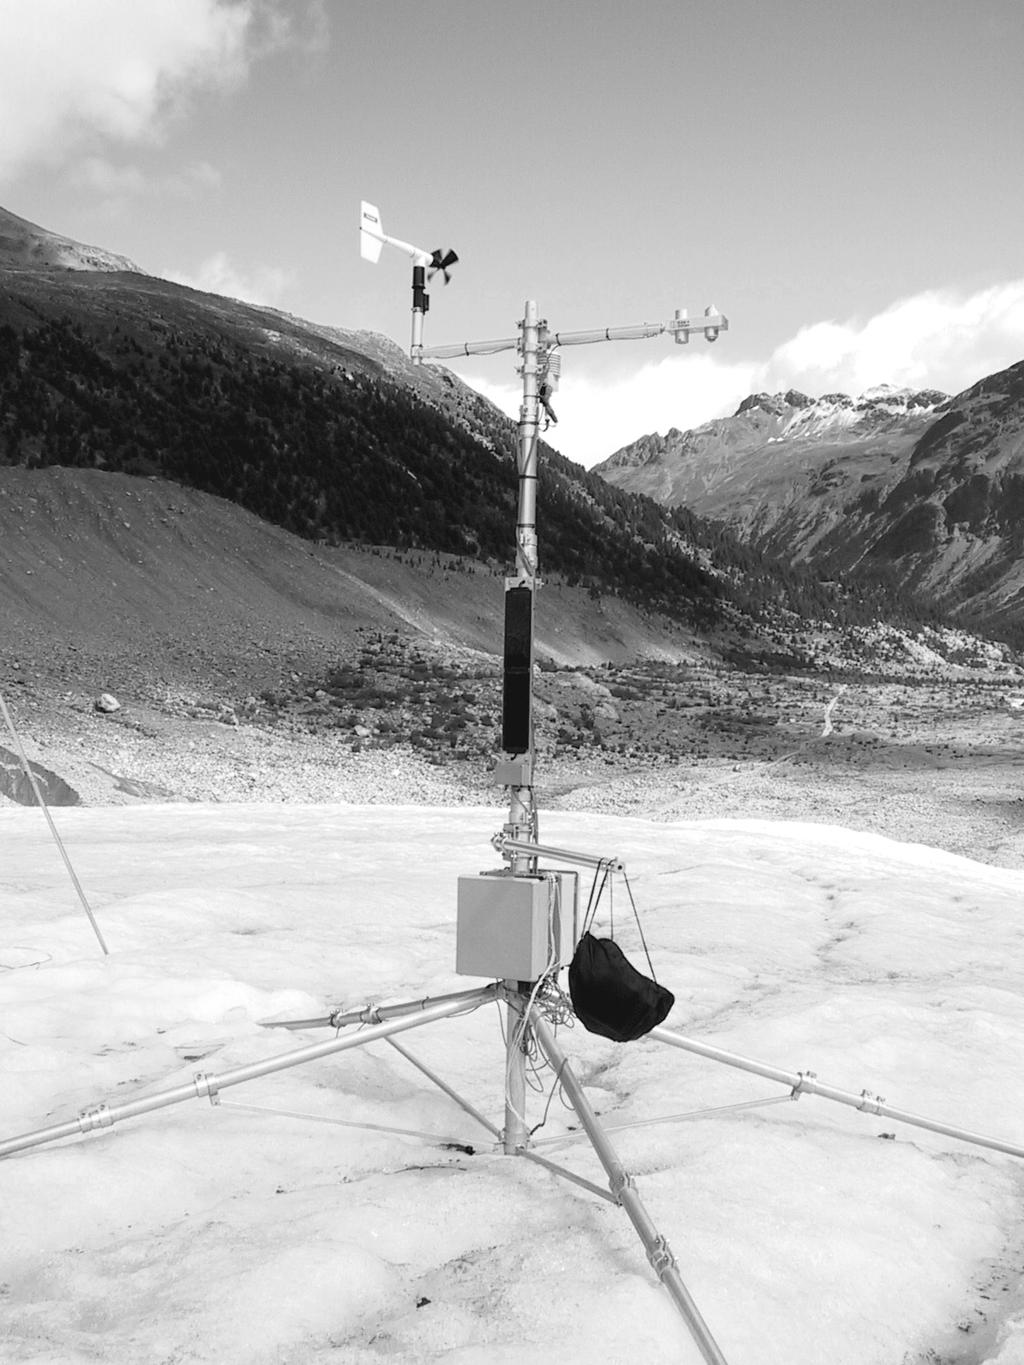 Knap et al., 1999). Chapter 2 uses a series of satellite images of Morteratsch- gletscher to investigate both the spatial and temporal variation of the albedo of Morteratschgletscher.